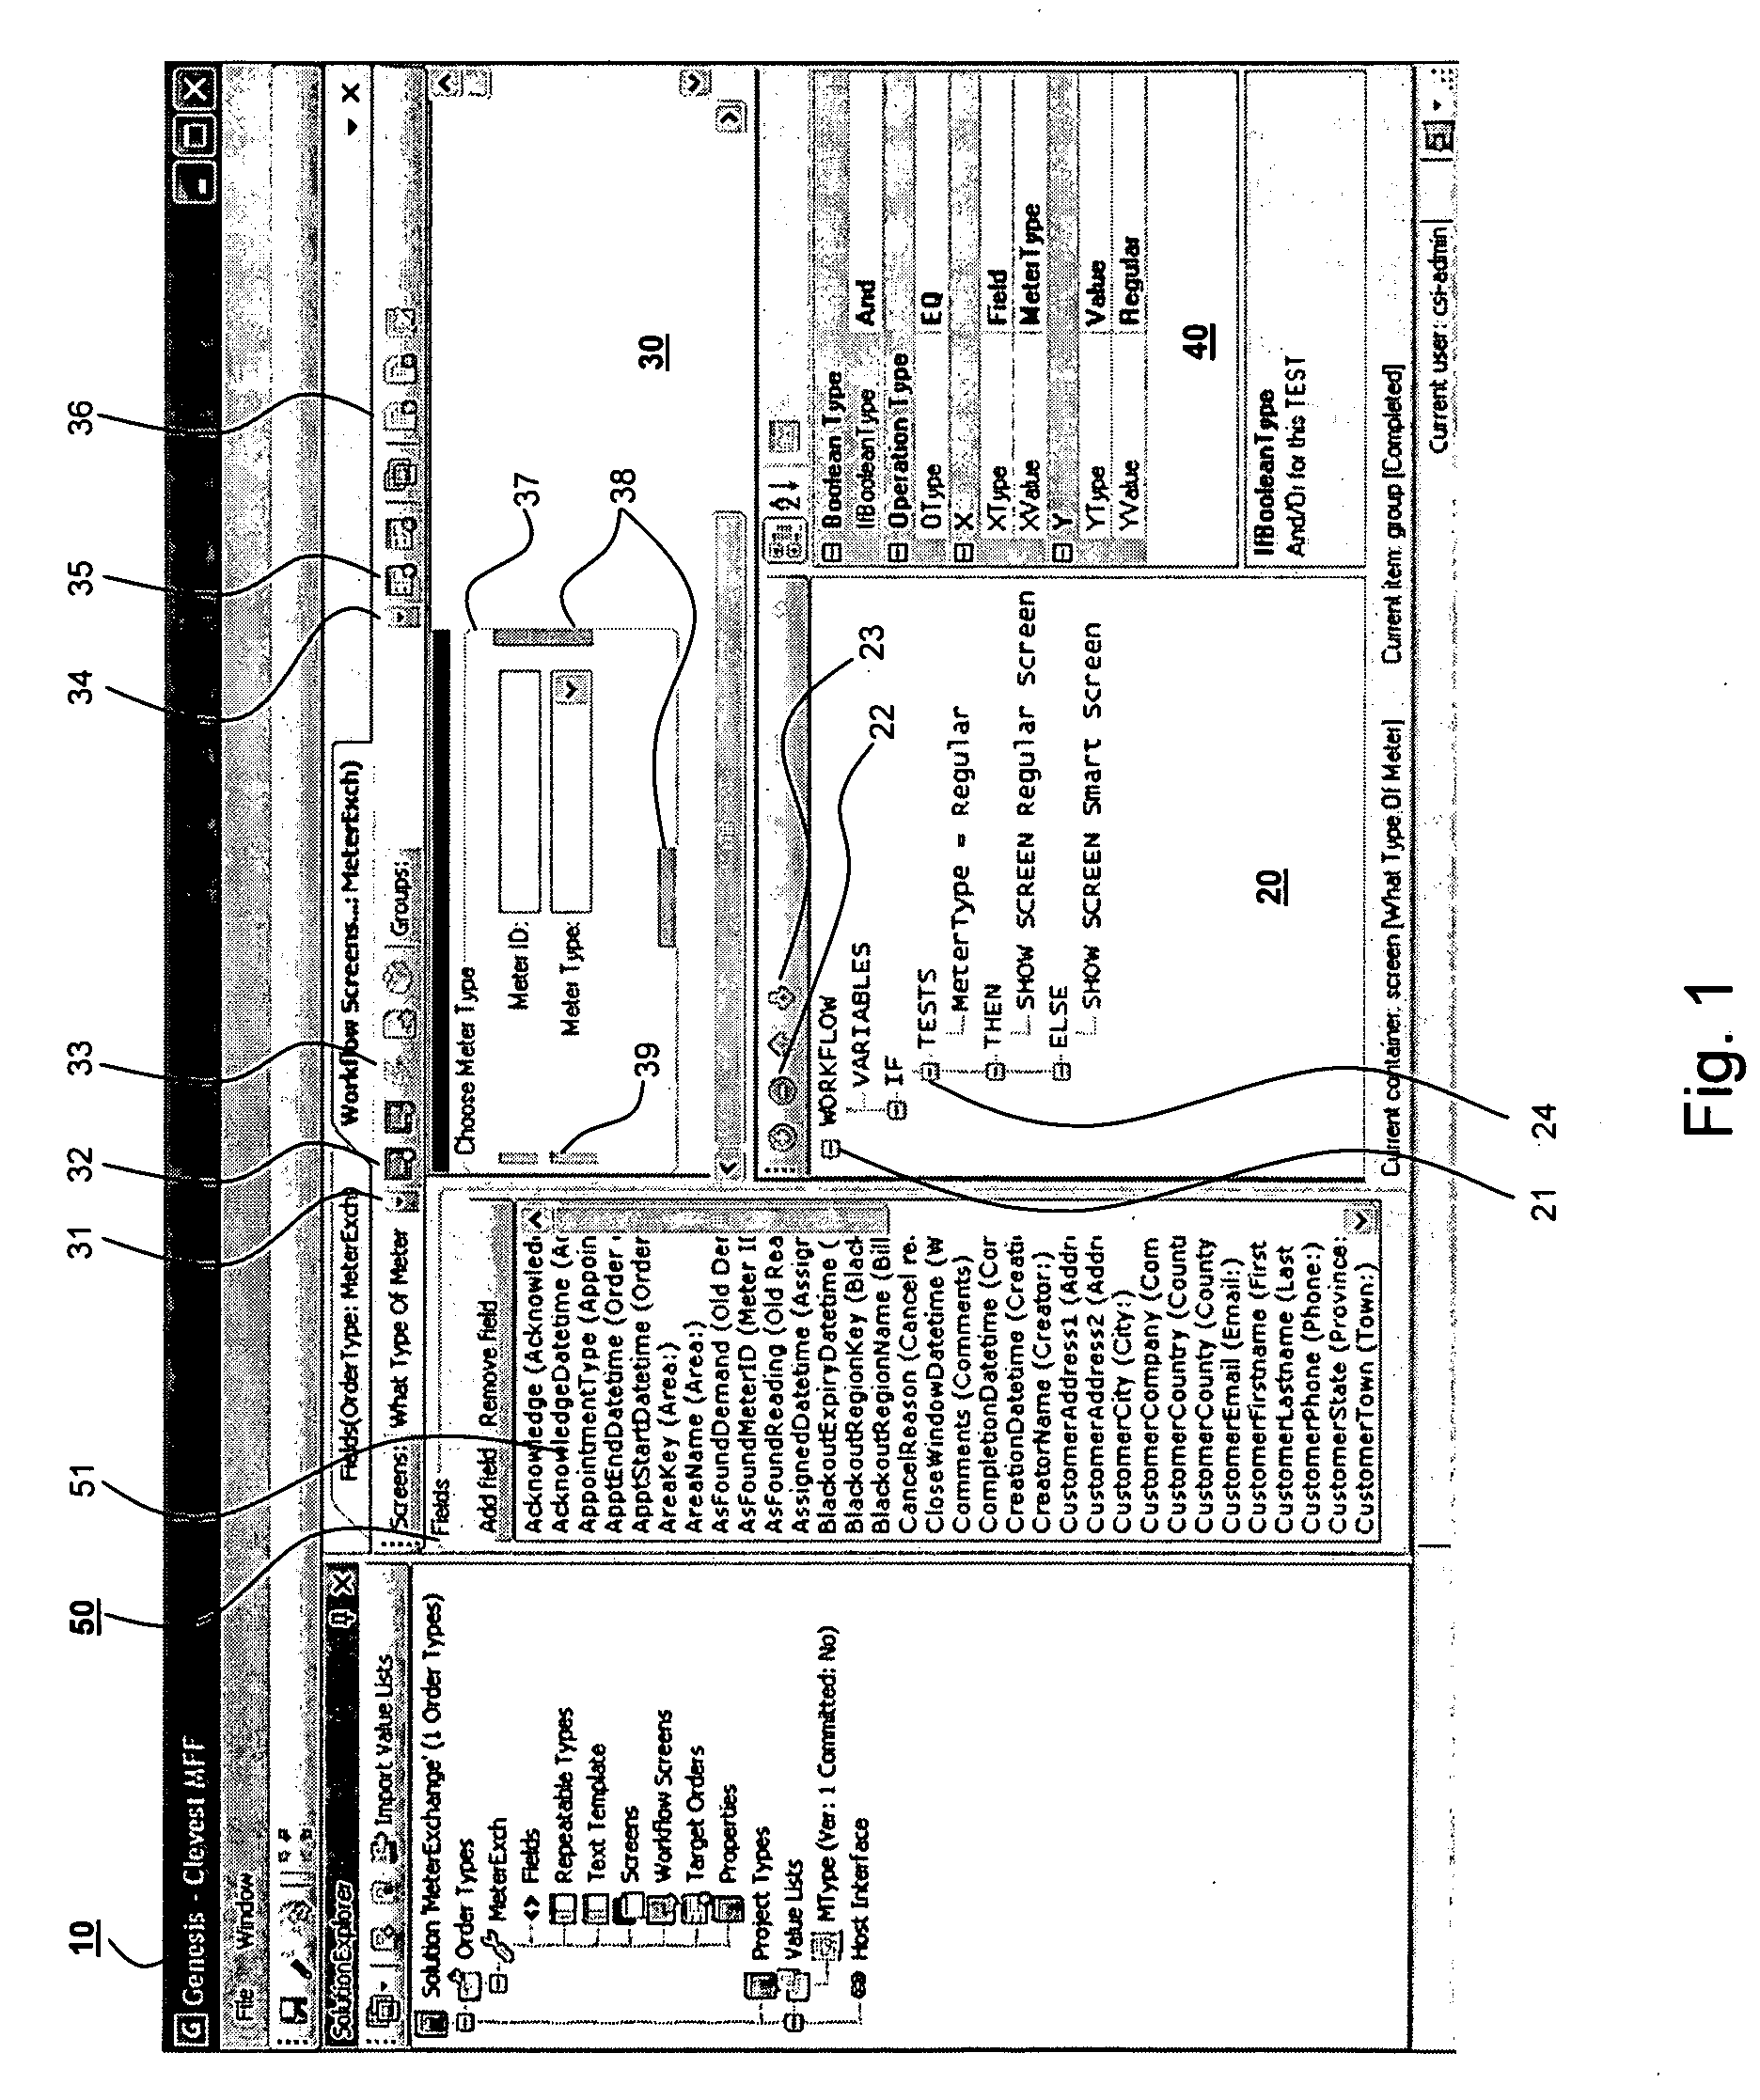 Method and system of editing workflow logic and screens with a GUI tool